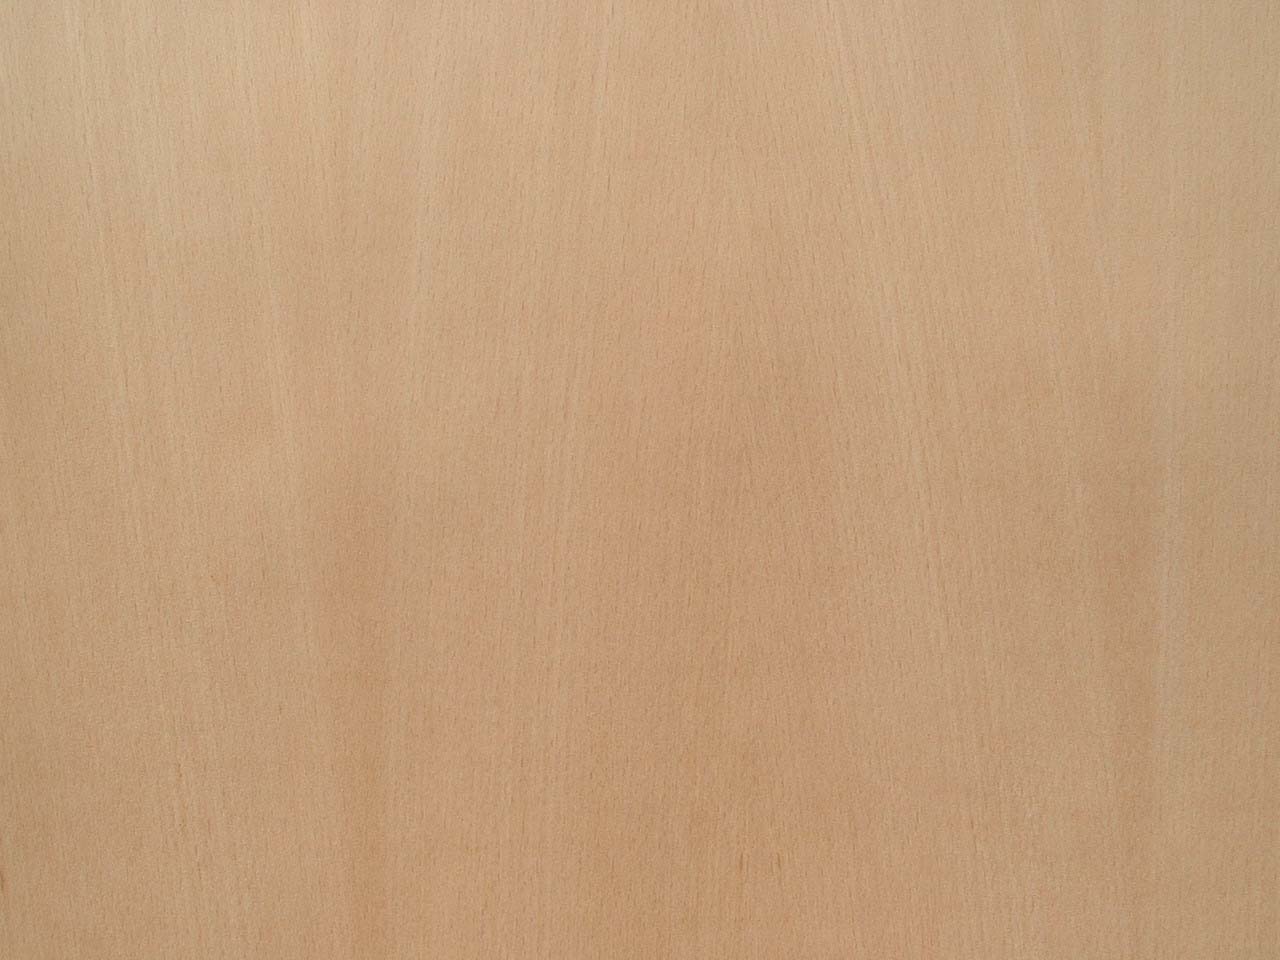 White Birch wood veneer 24" x 24" with paper backer 1/40" thickness A grade 